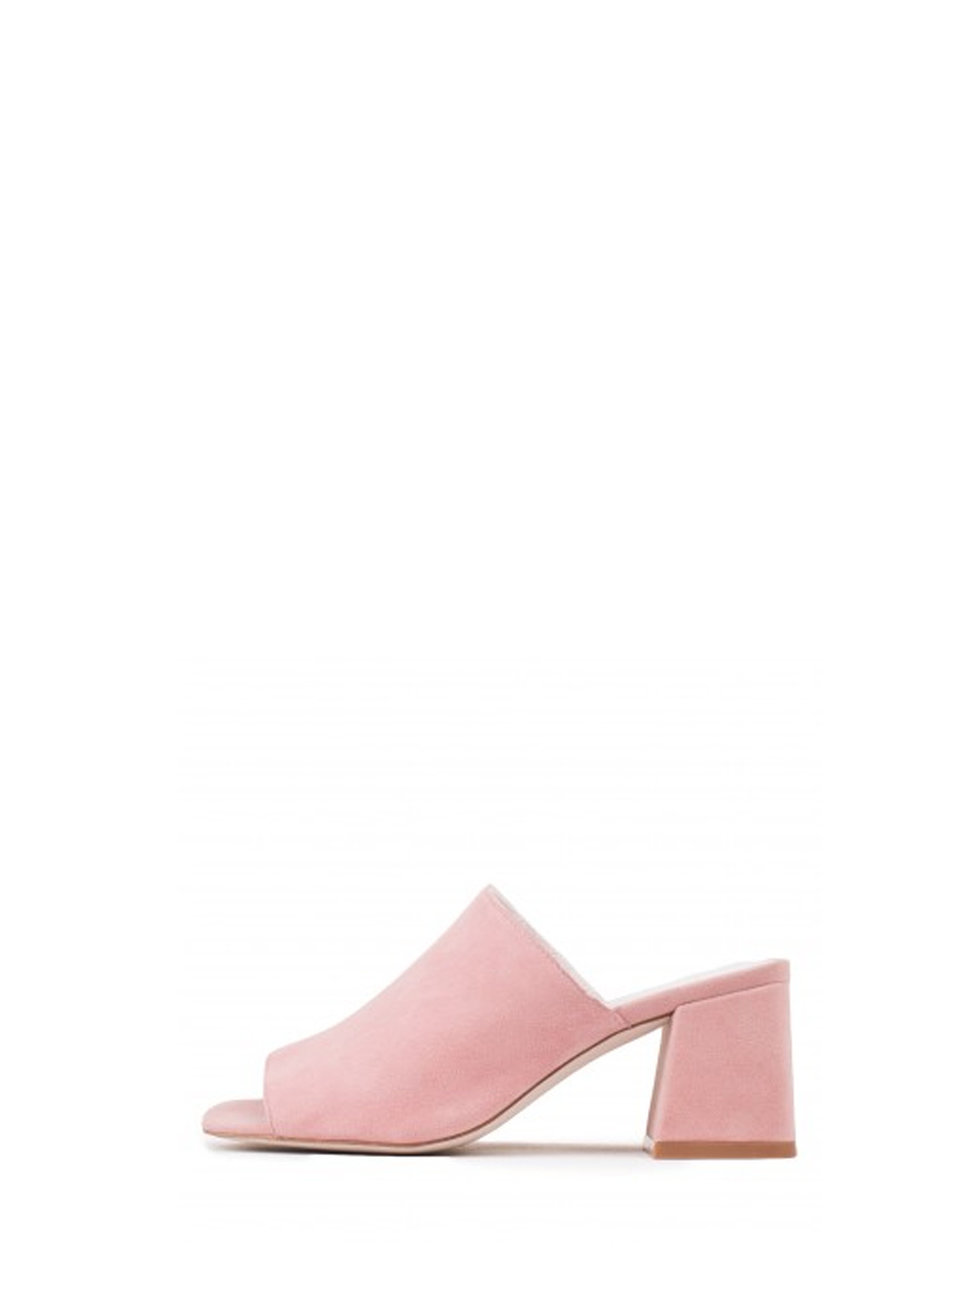 NYLON · 15 Open-Toe Mules You Need This Spring